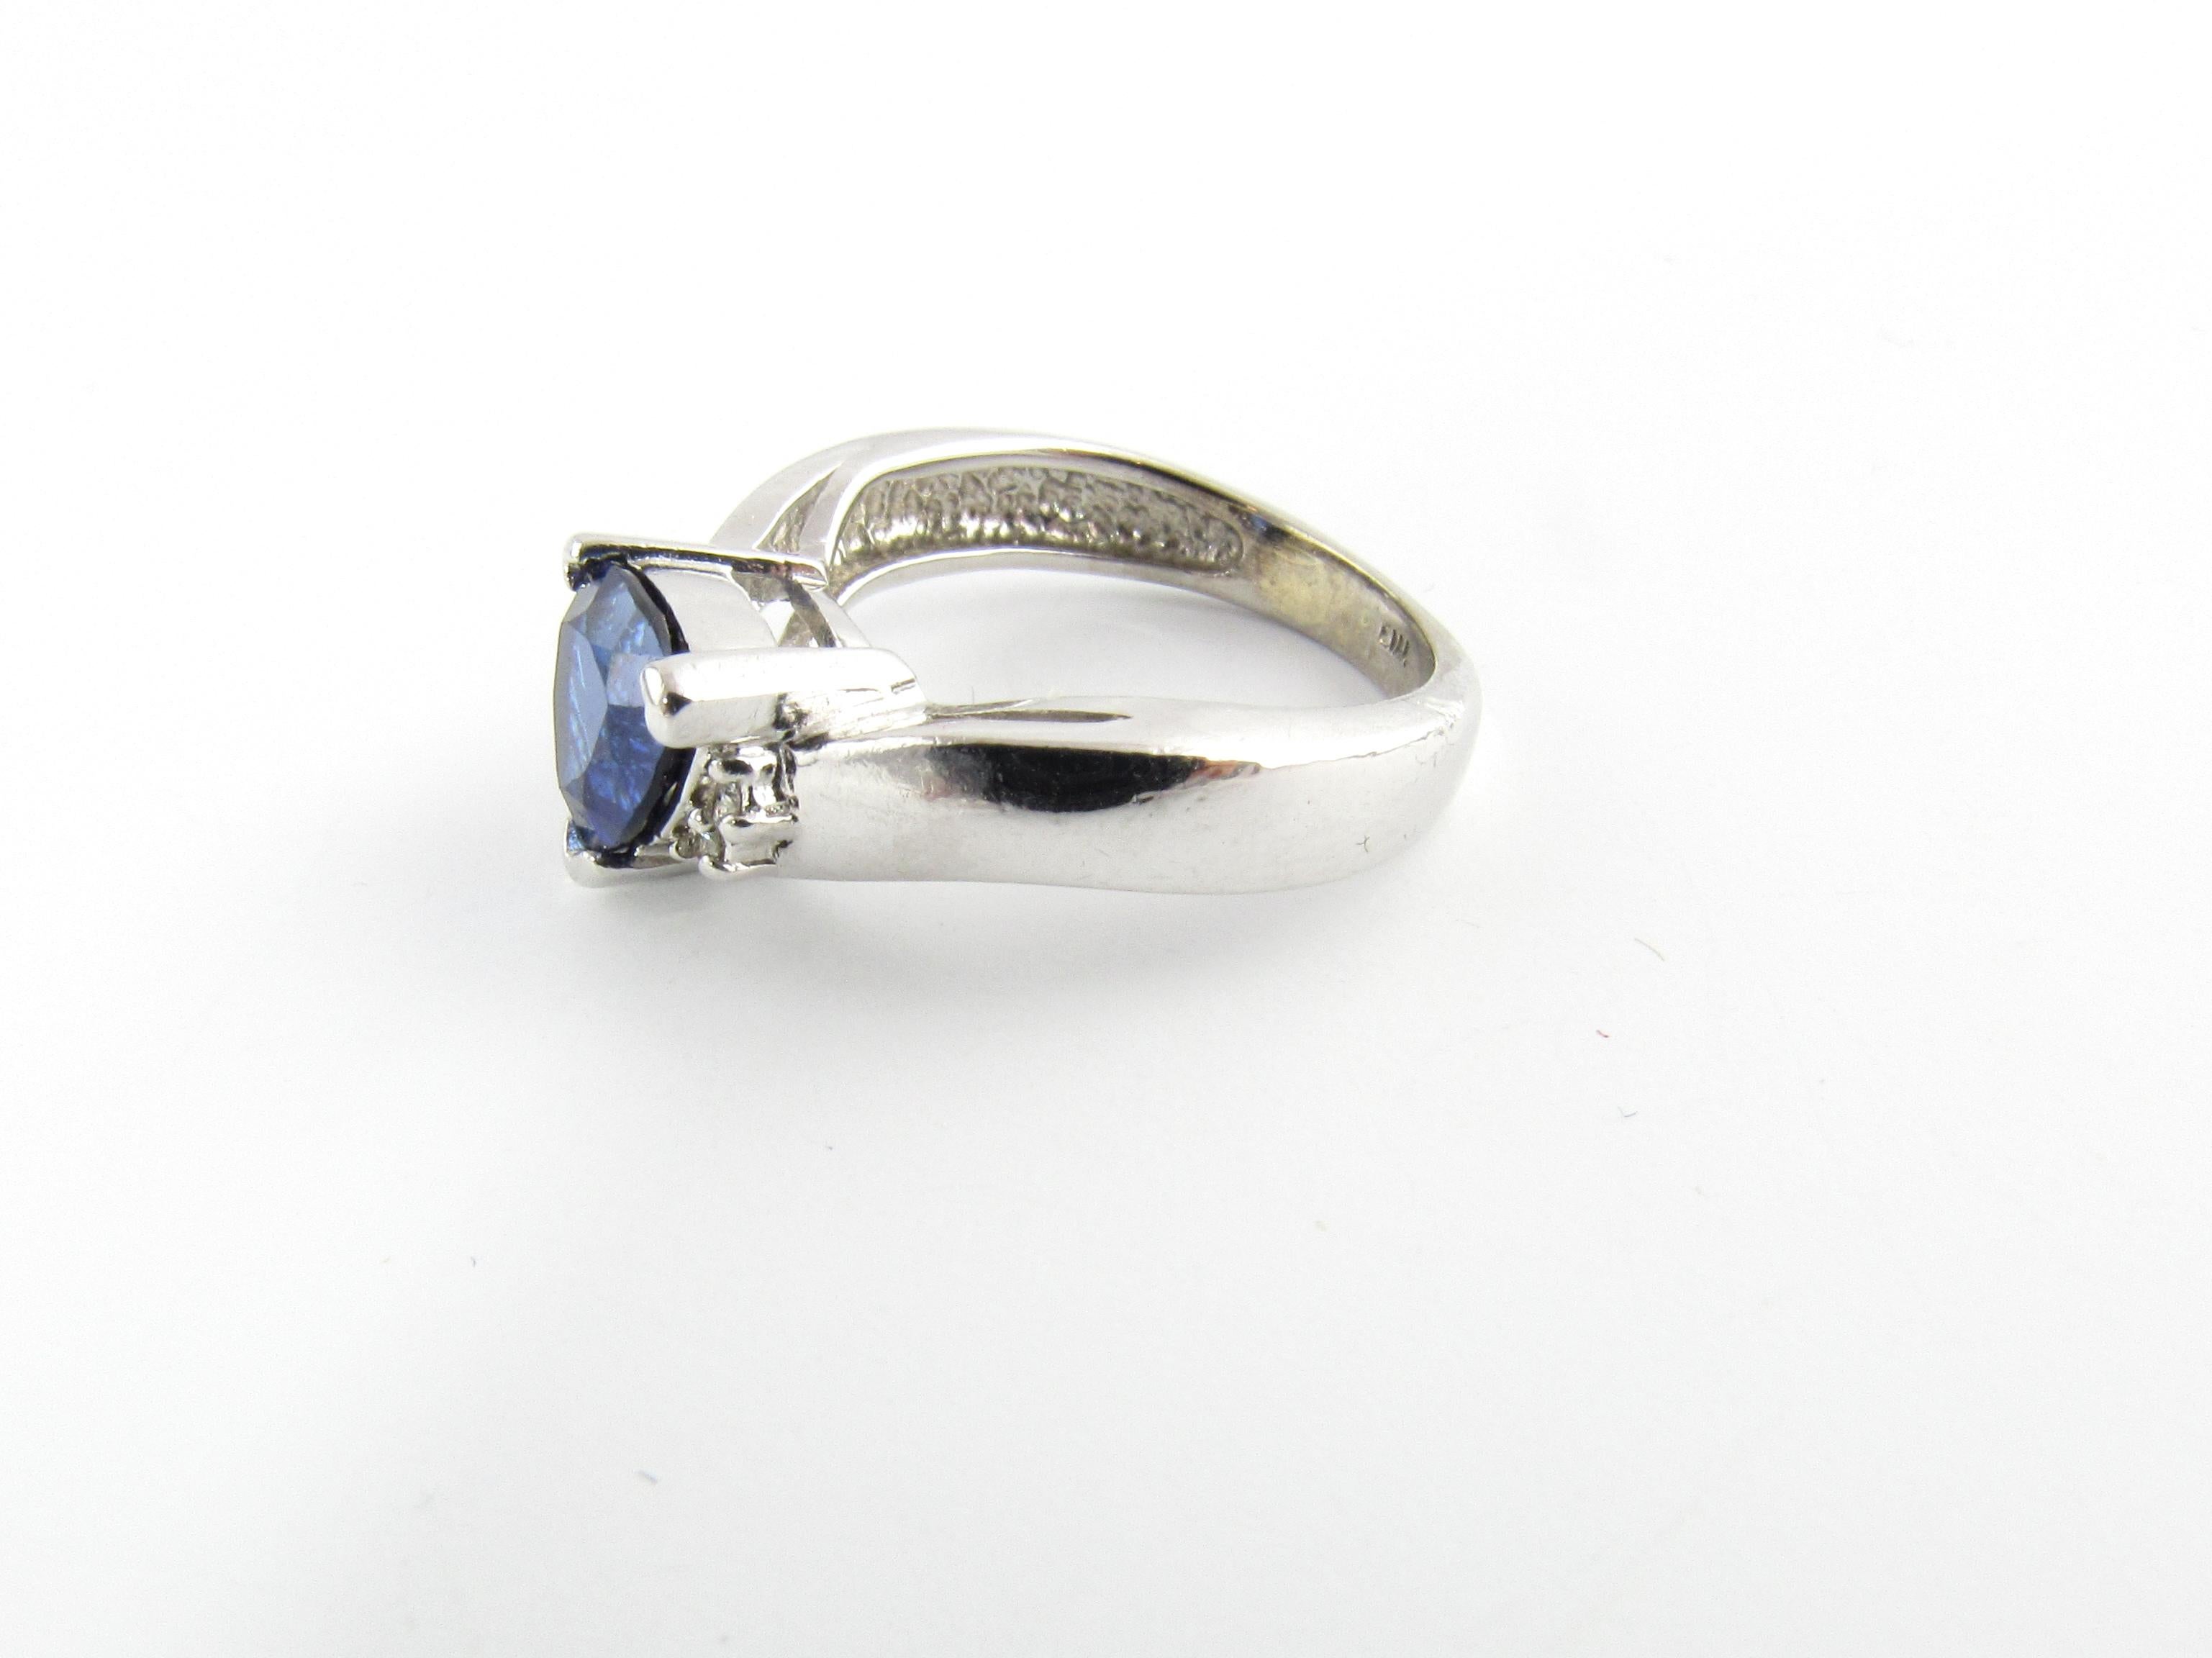 Vintage 14 Karat White Gold Sapphire and Diamond Ring Size 4.5-

This lovely ring features one triangular sapphire (8 mm x 8 mm) and four round brilliant cut diamonds set in polished 14K white gold.  Shank measures 2.5 mm.

Comes with Gemological